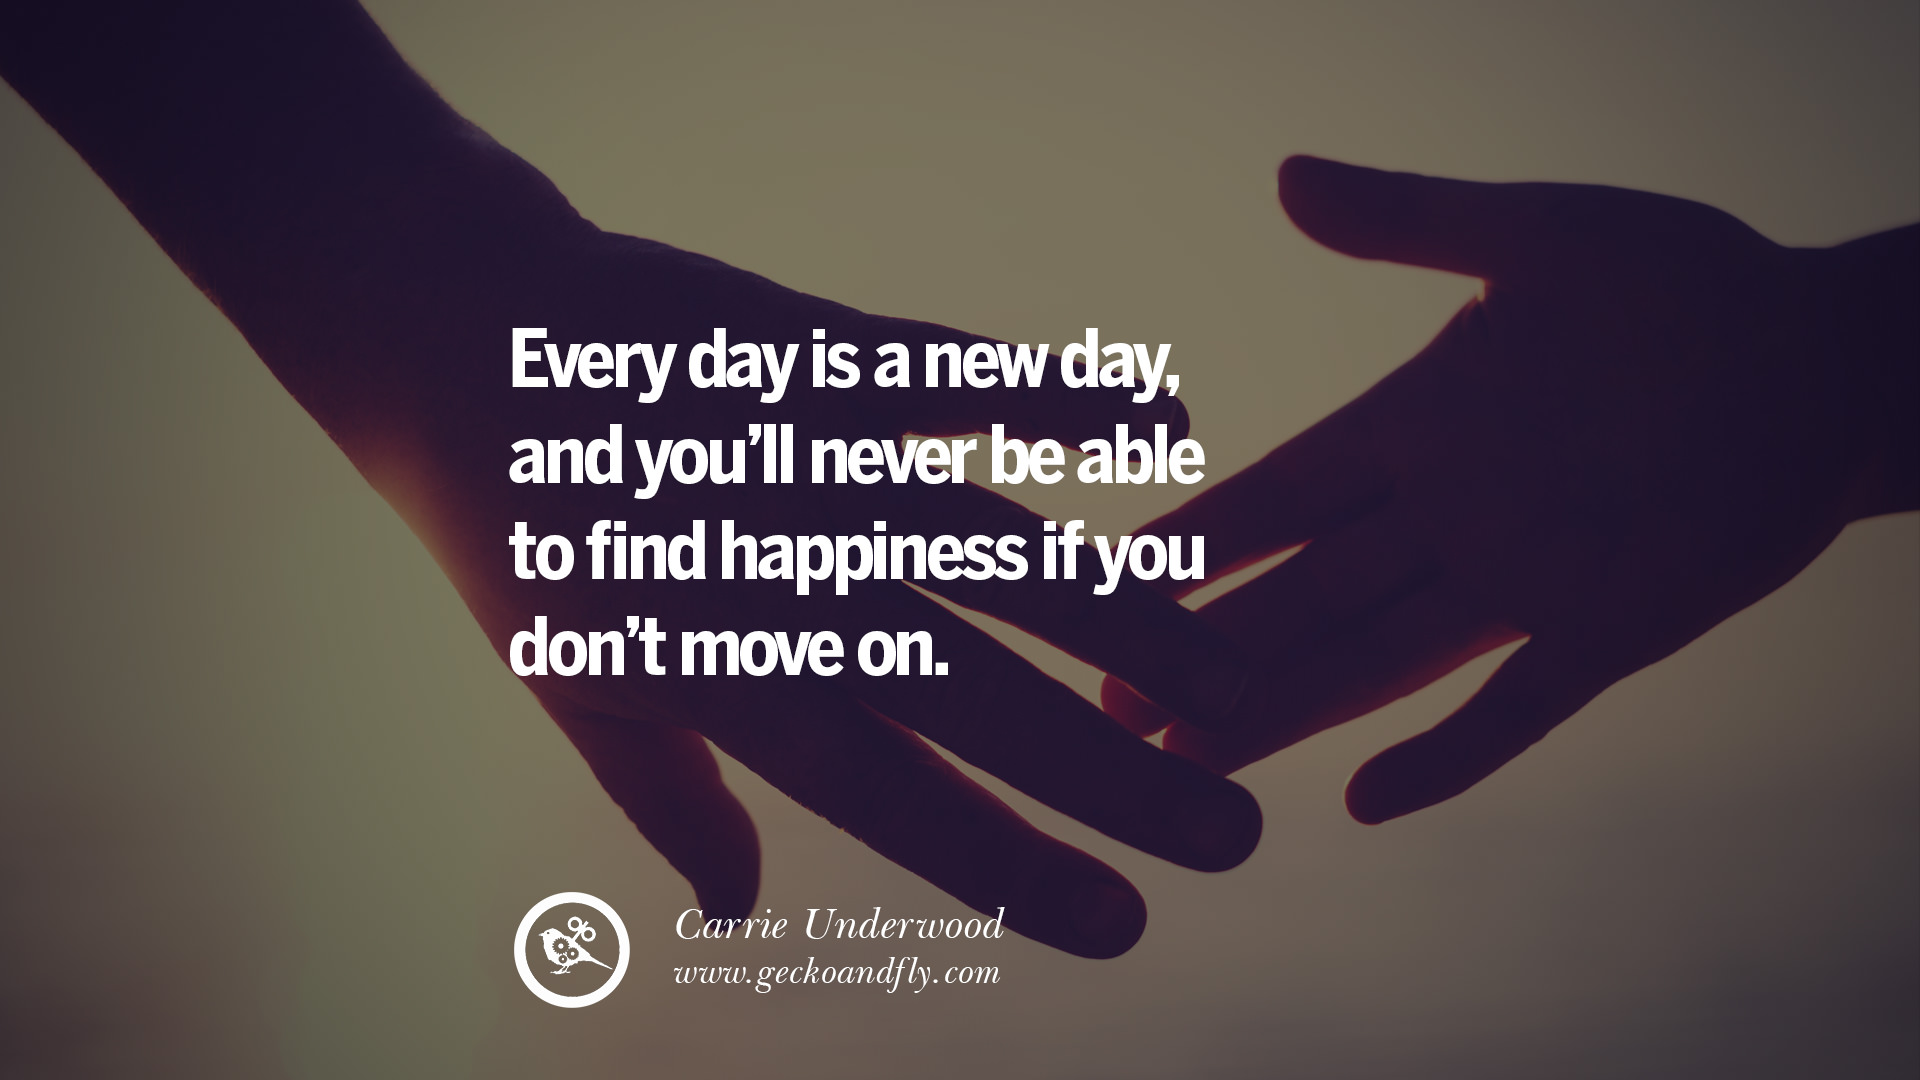 Every day is a new day and you ll never be able to find happiness if you don t move on